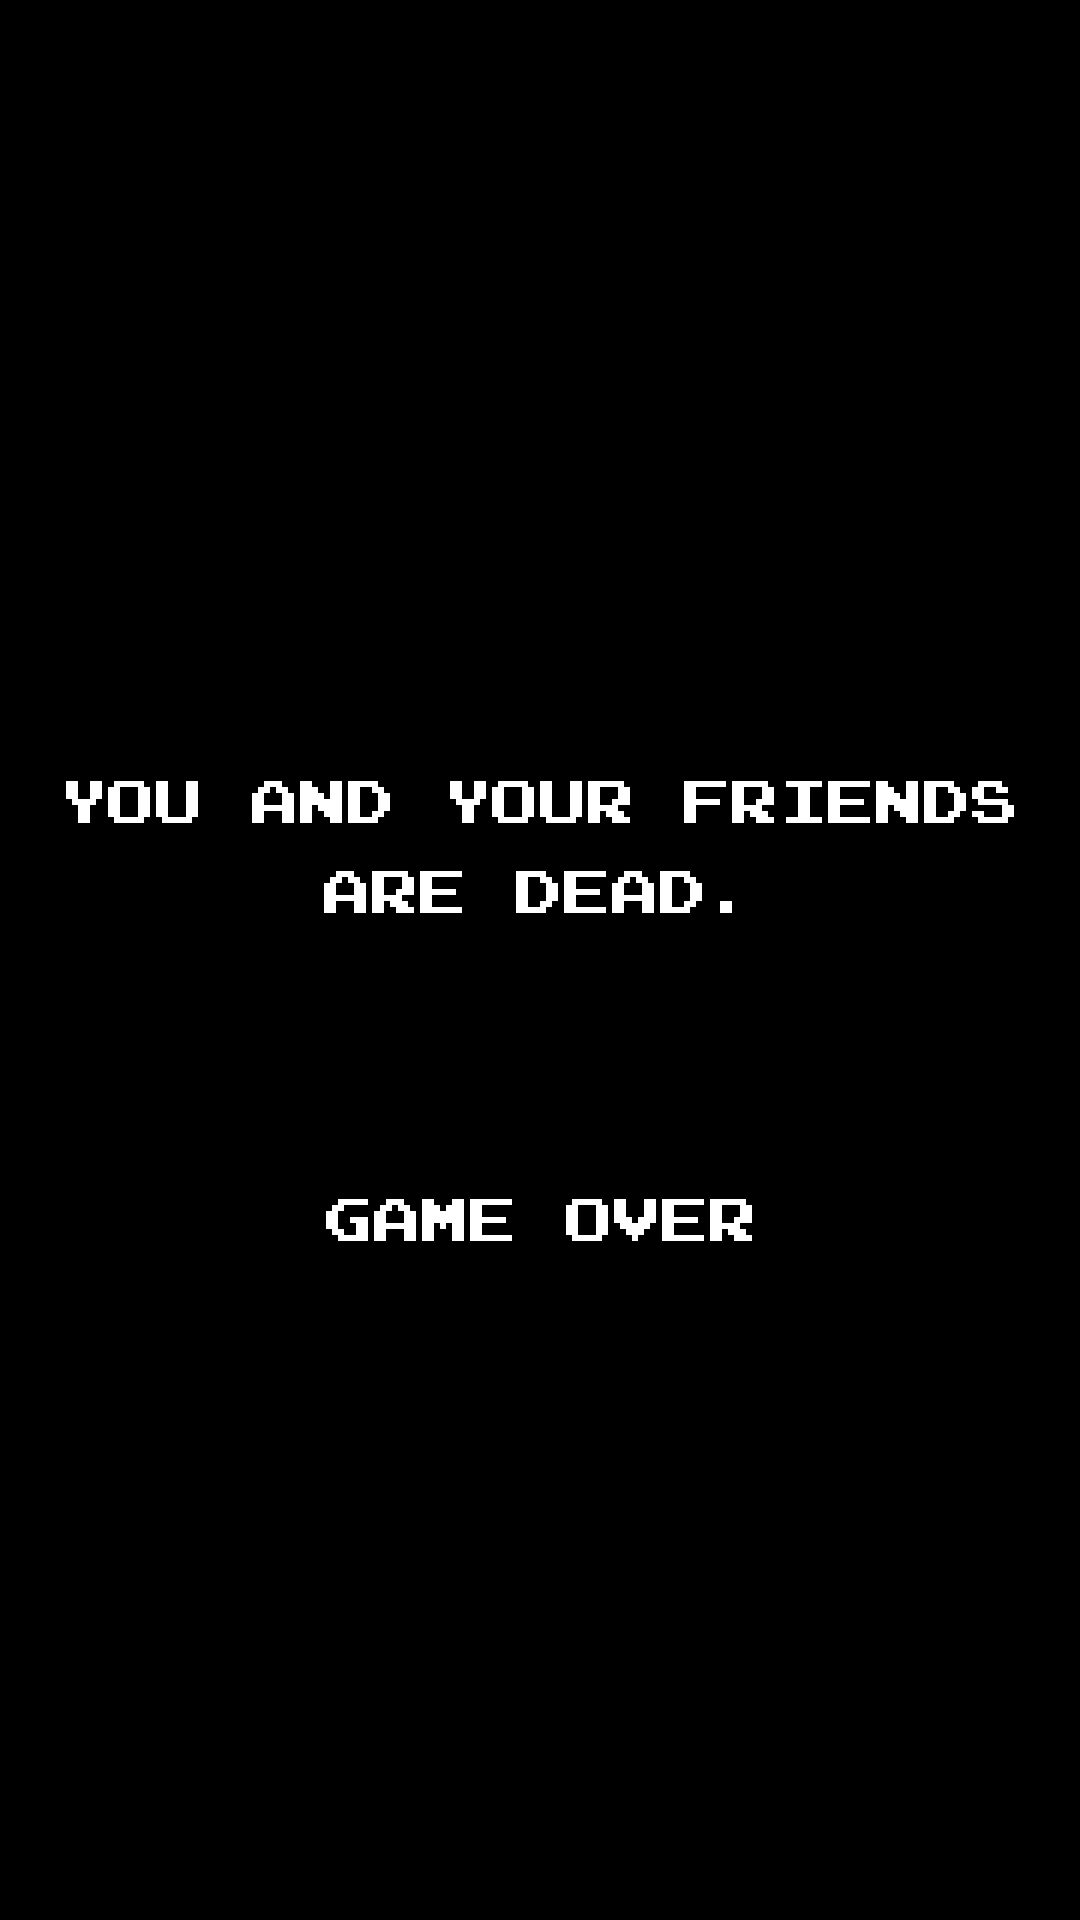 Game Over Wallpaper  HD Wallpaper Collection  Retro games wallpaper Hd  cool wallpapers Love games